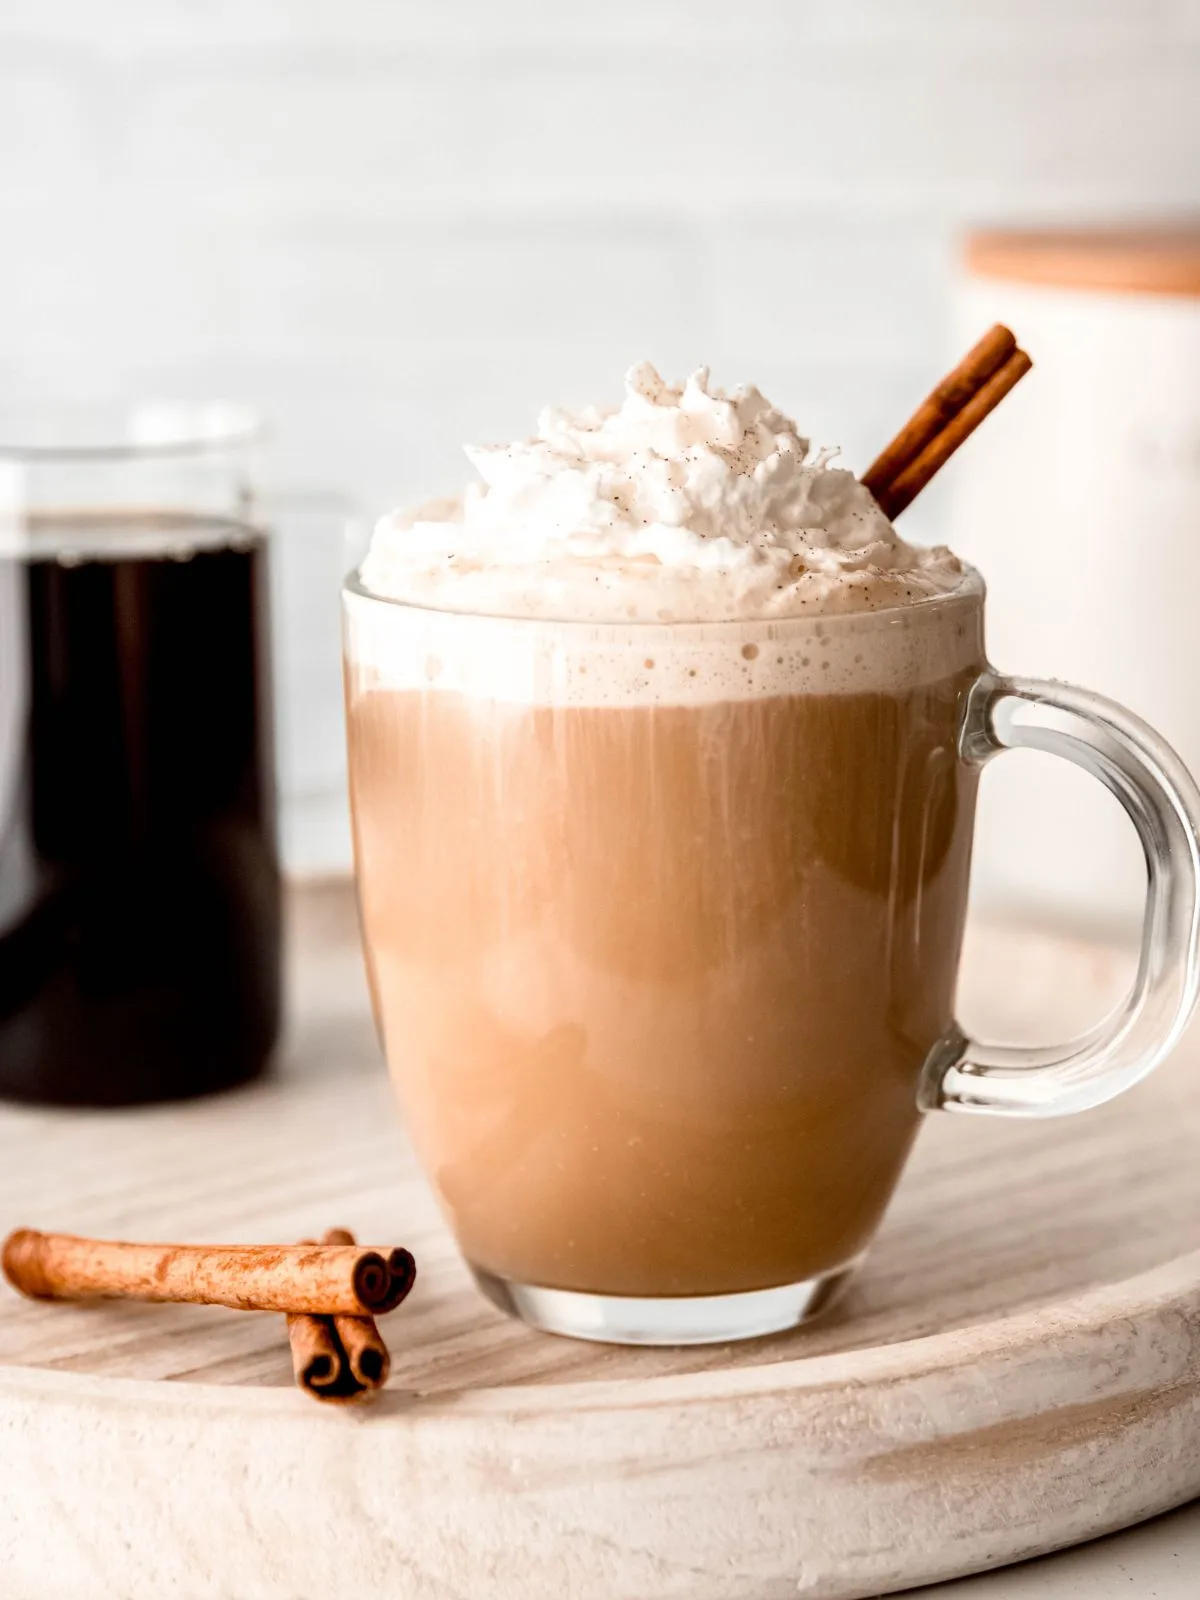 A cup of coffee with whipped cream and cinnamon sticks.